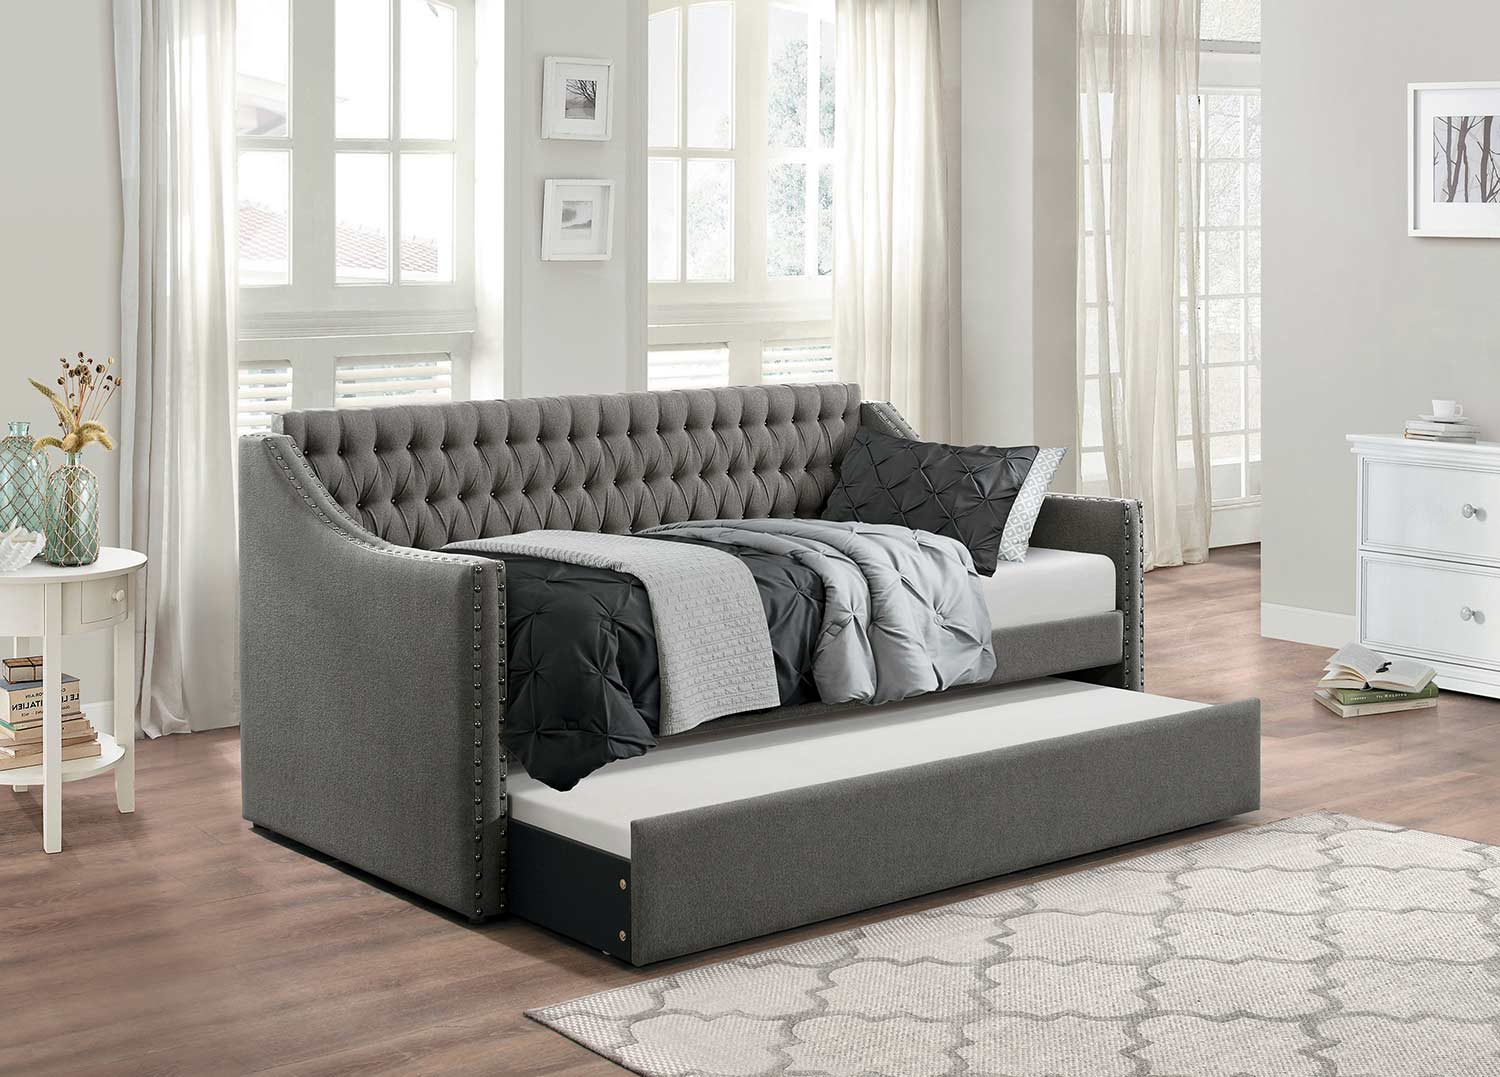 Homelegance Tulney Button Tufted Upholstered Daybed with Trundle - - Dark Gray